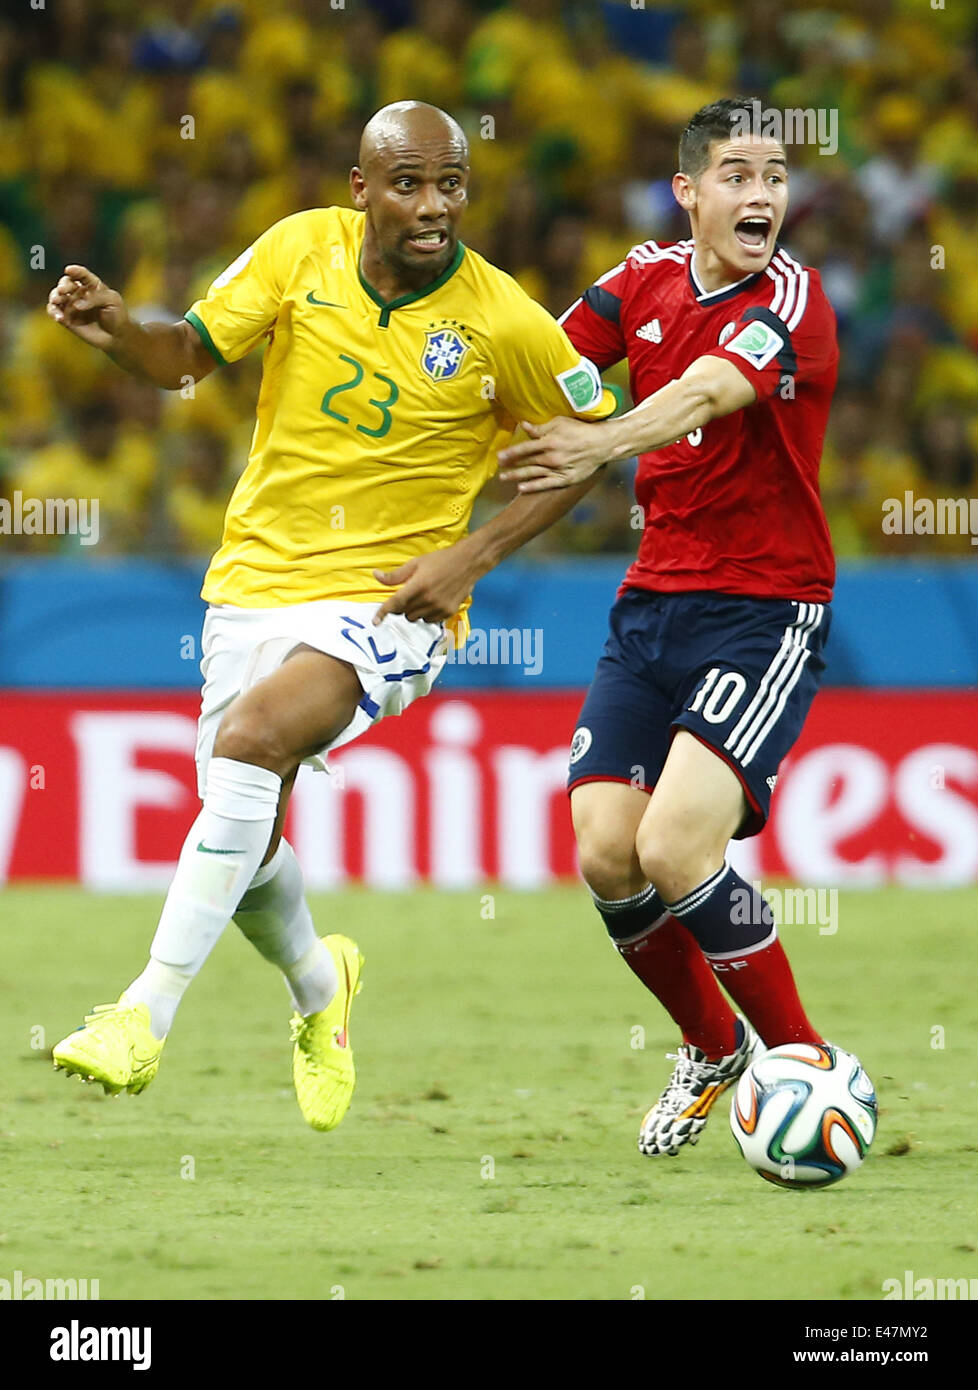 Fortaleza, Brazil. 4th July, 2014. Brazil's Maicon vies with Colombia's James Rodriguez during a quarter-finals match between Brazil and Colombia of 2014 FIFA World Cup at the Estadio Castelao Stadium in Fortaleza, Brazil, on July 4, 2014. Credit:  Chen Jianli/Xinhua/Alamy Live News Stock Photo